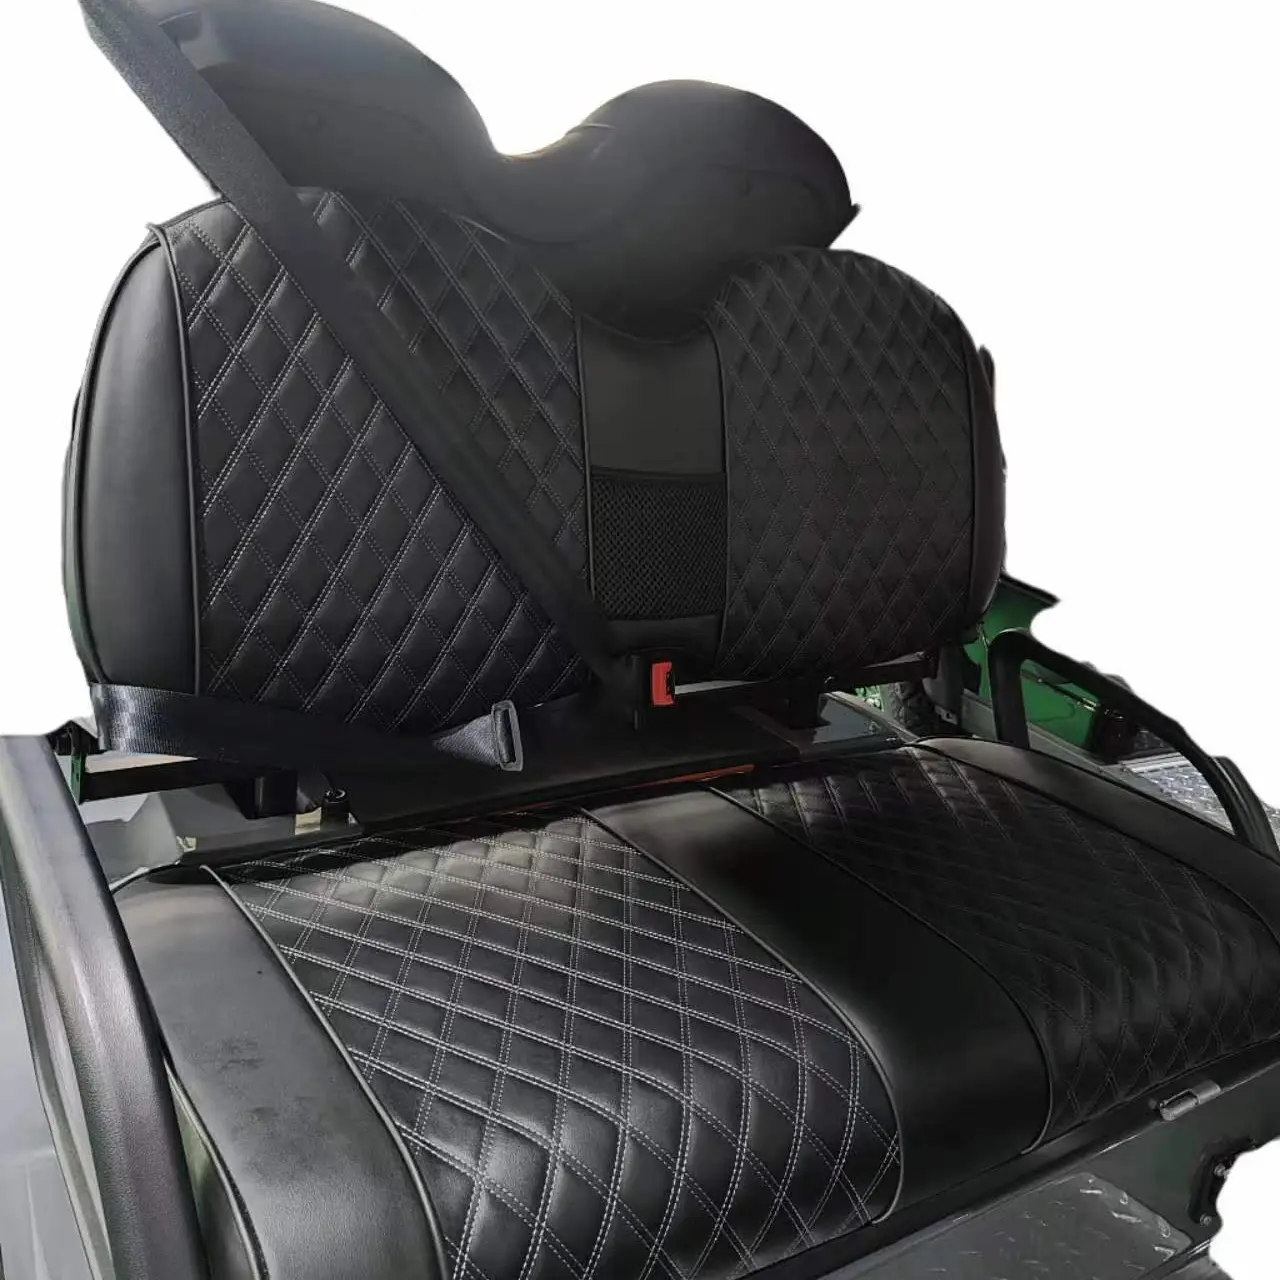 custom seat color and type